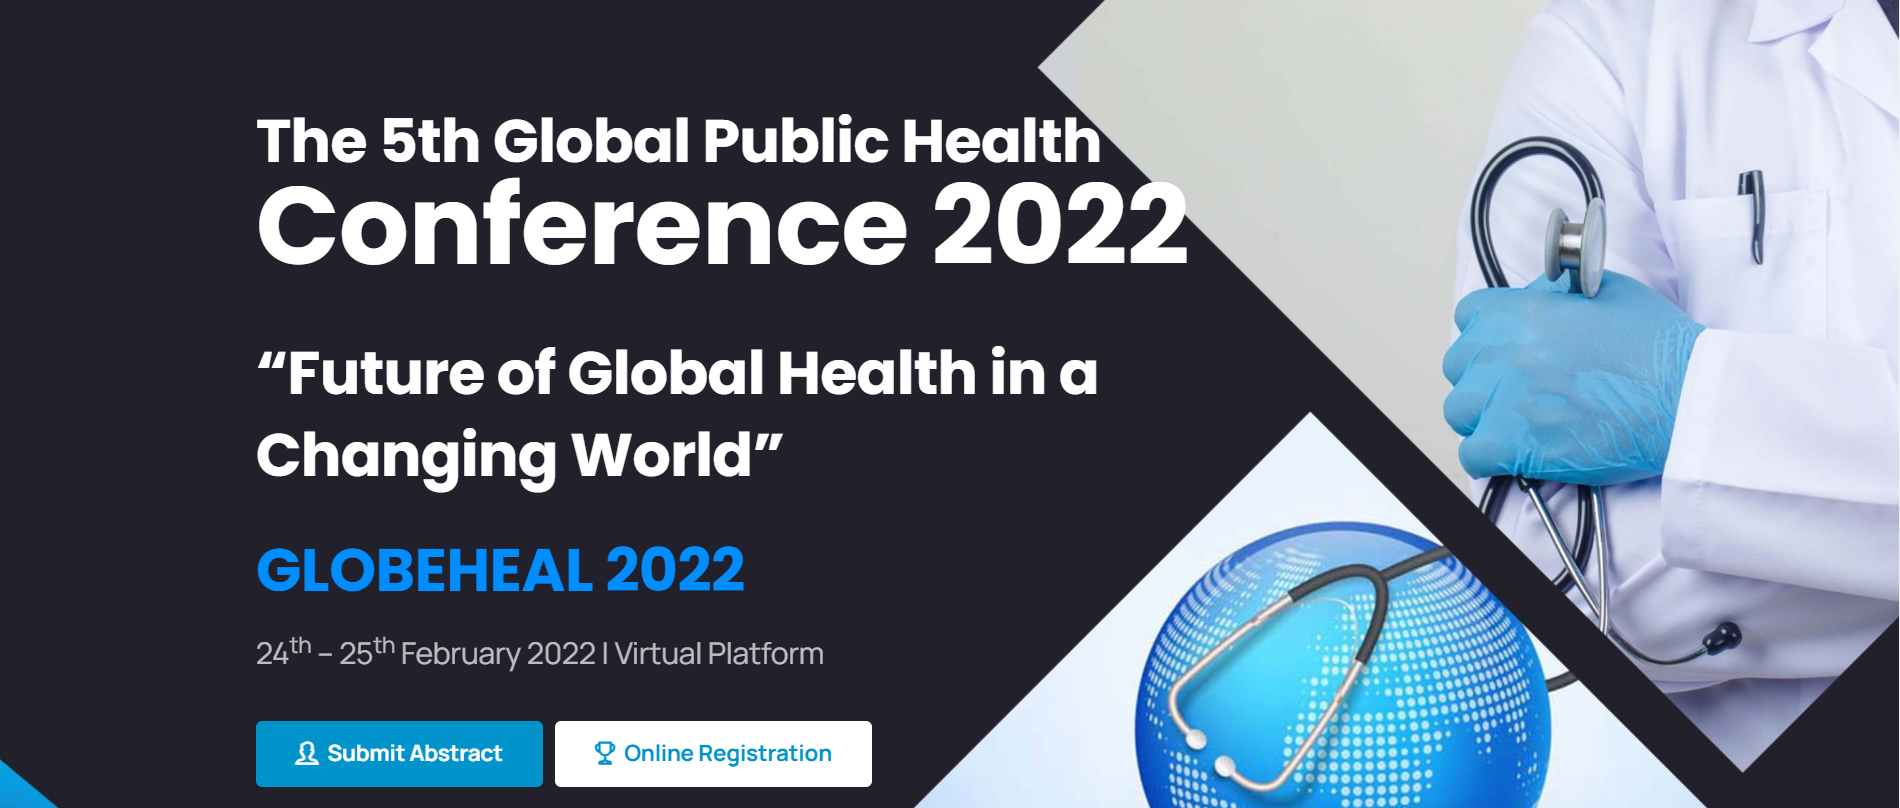 The 5th Global Public Health Conference 2022 (GLOBHEAL 2022), Online Event